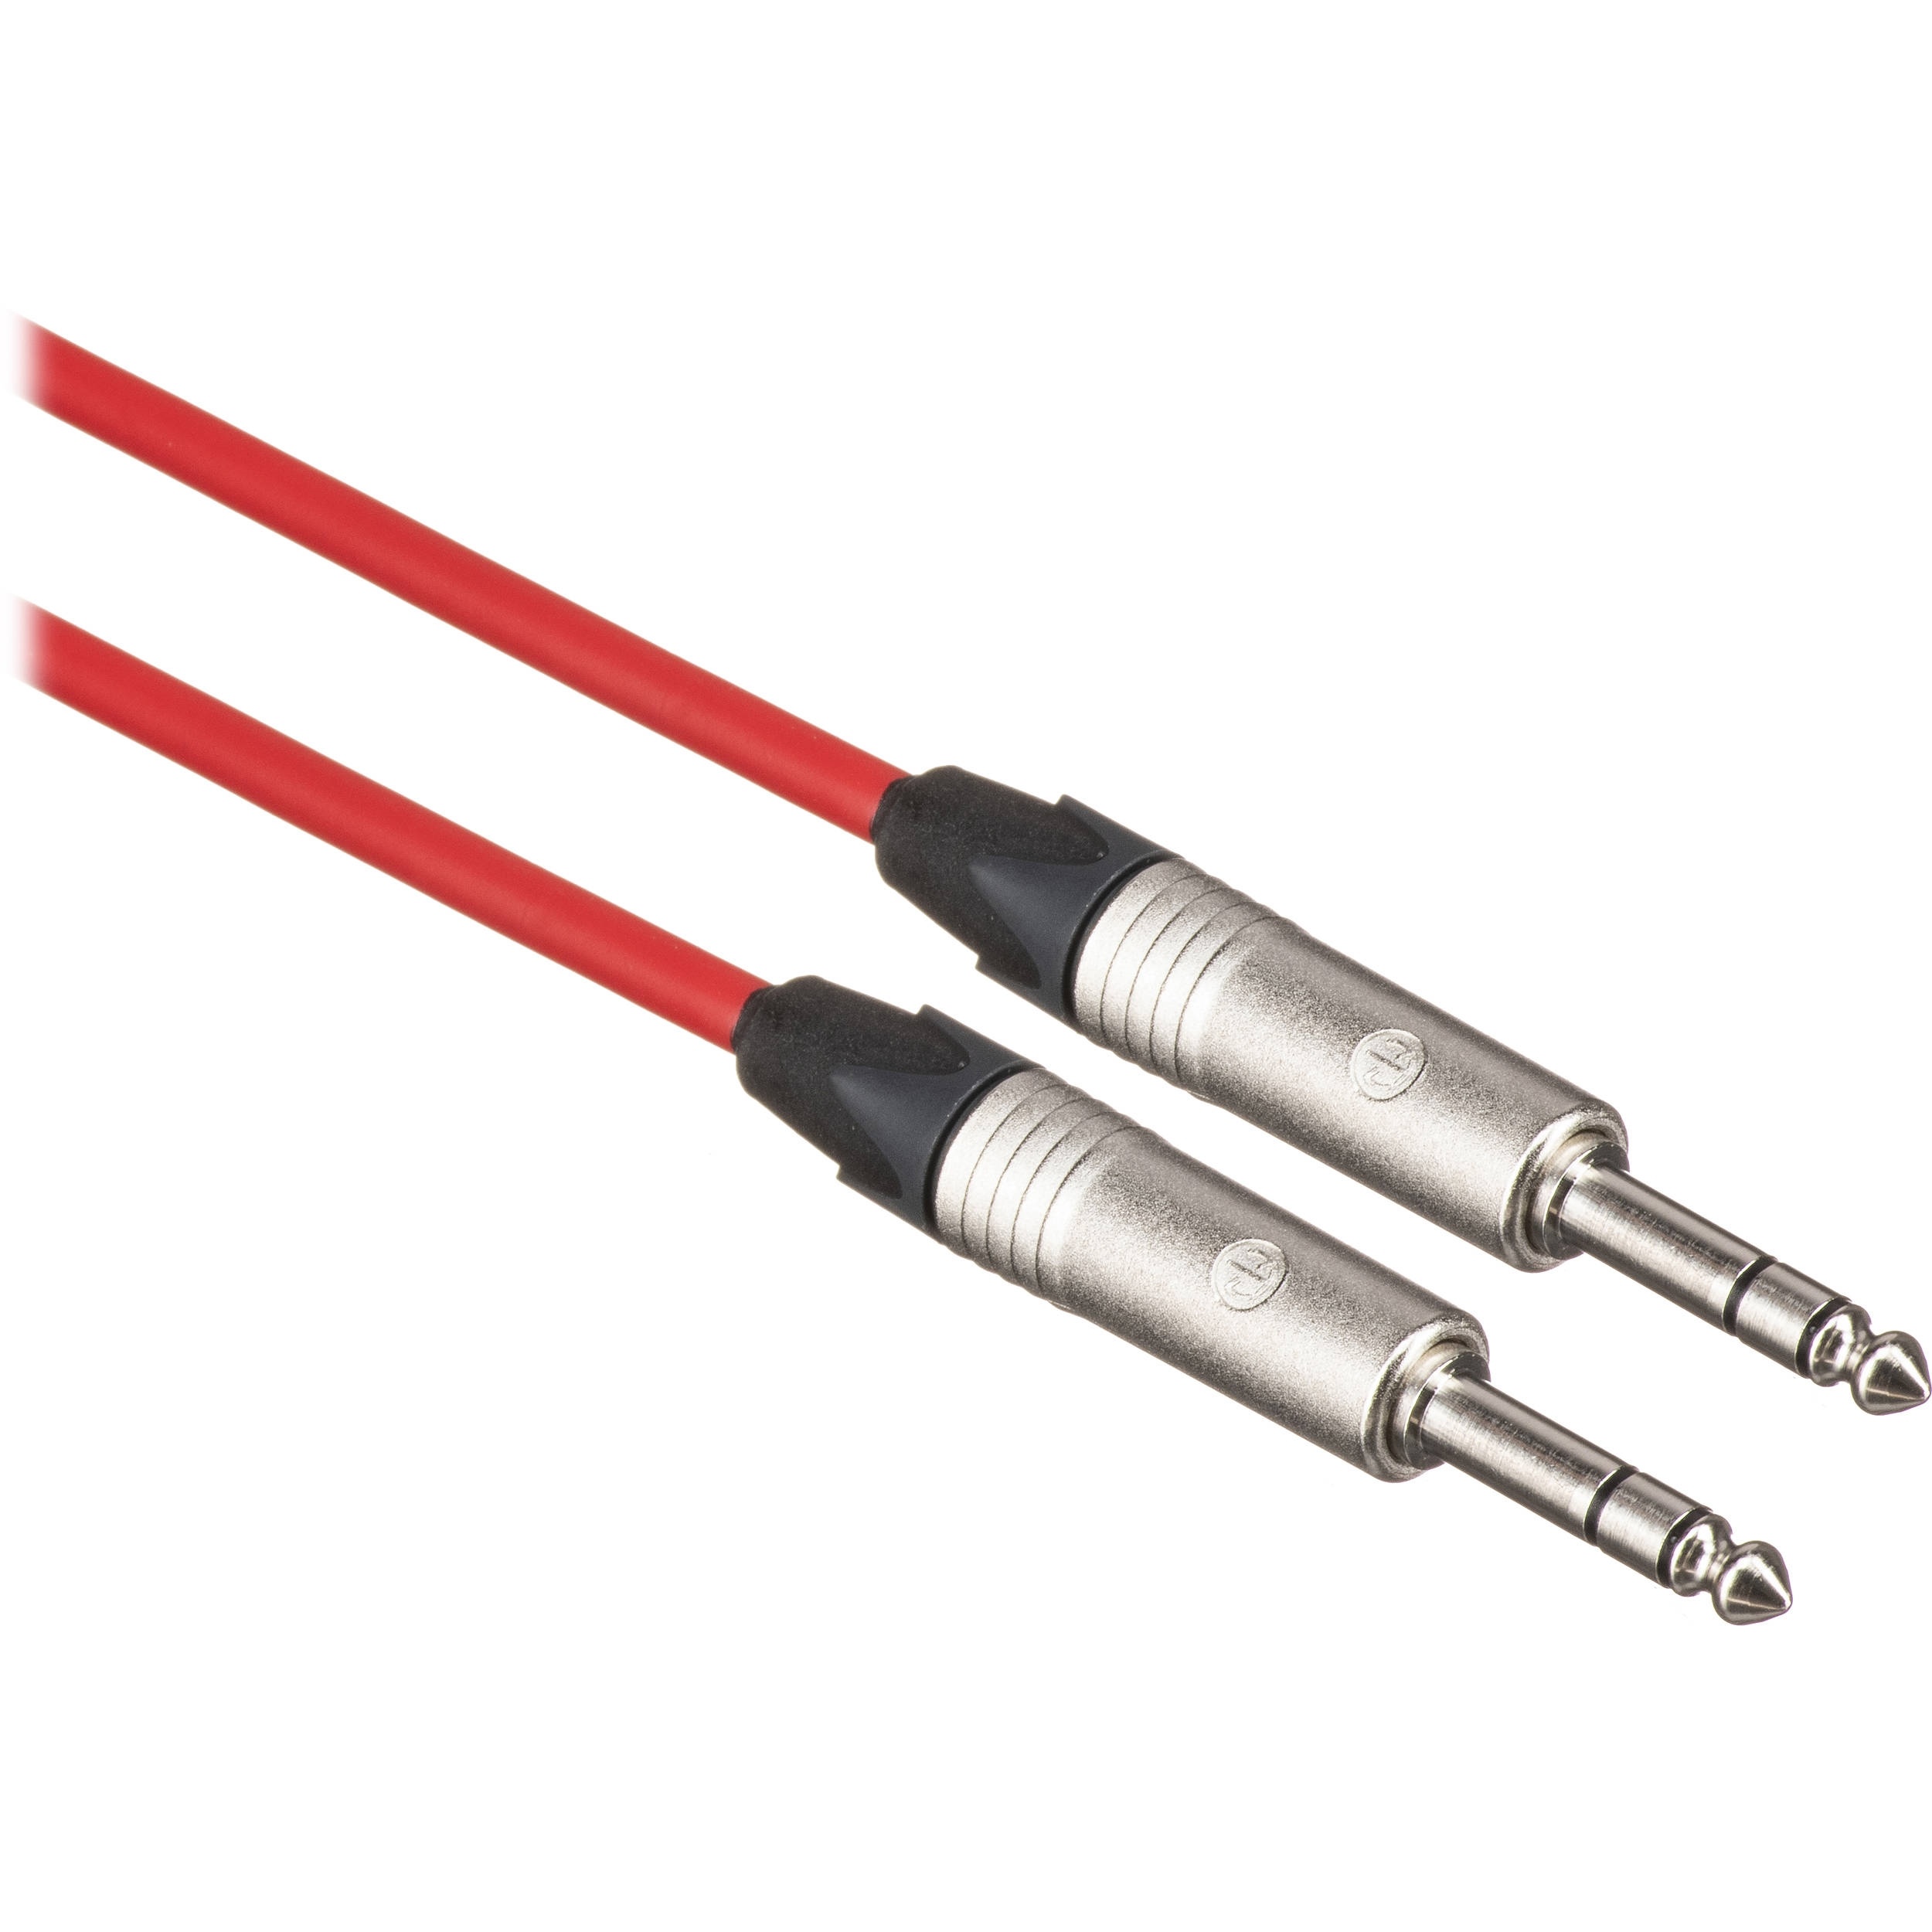 Canare Starquad TRSM-TRSM Cable (Red, 40')